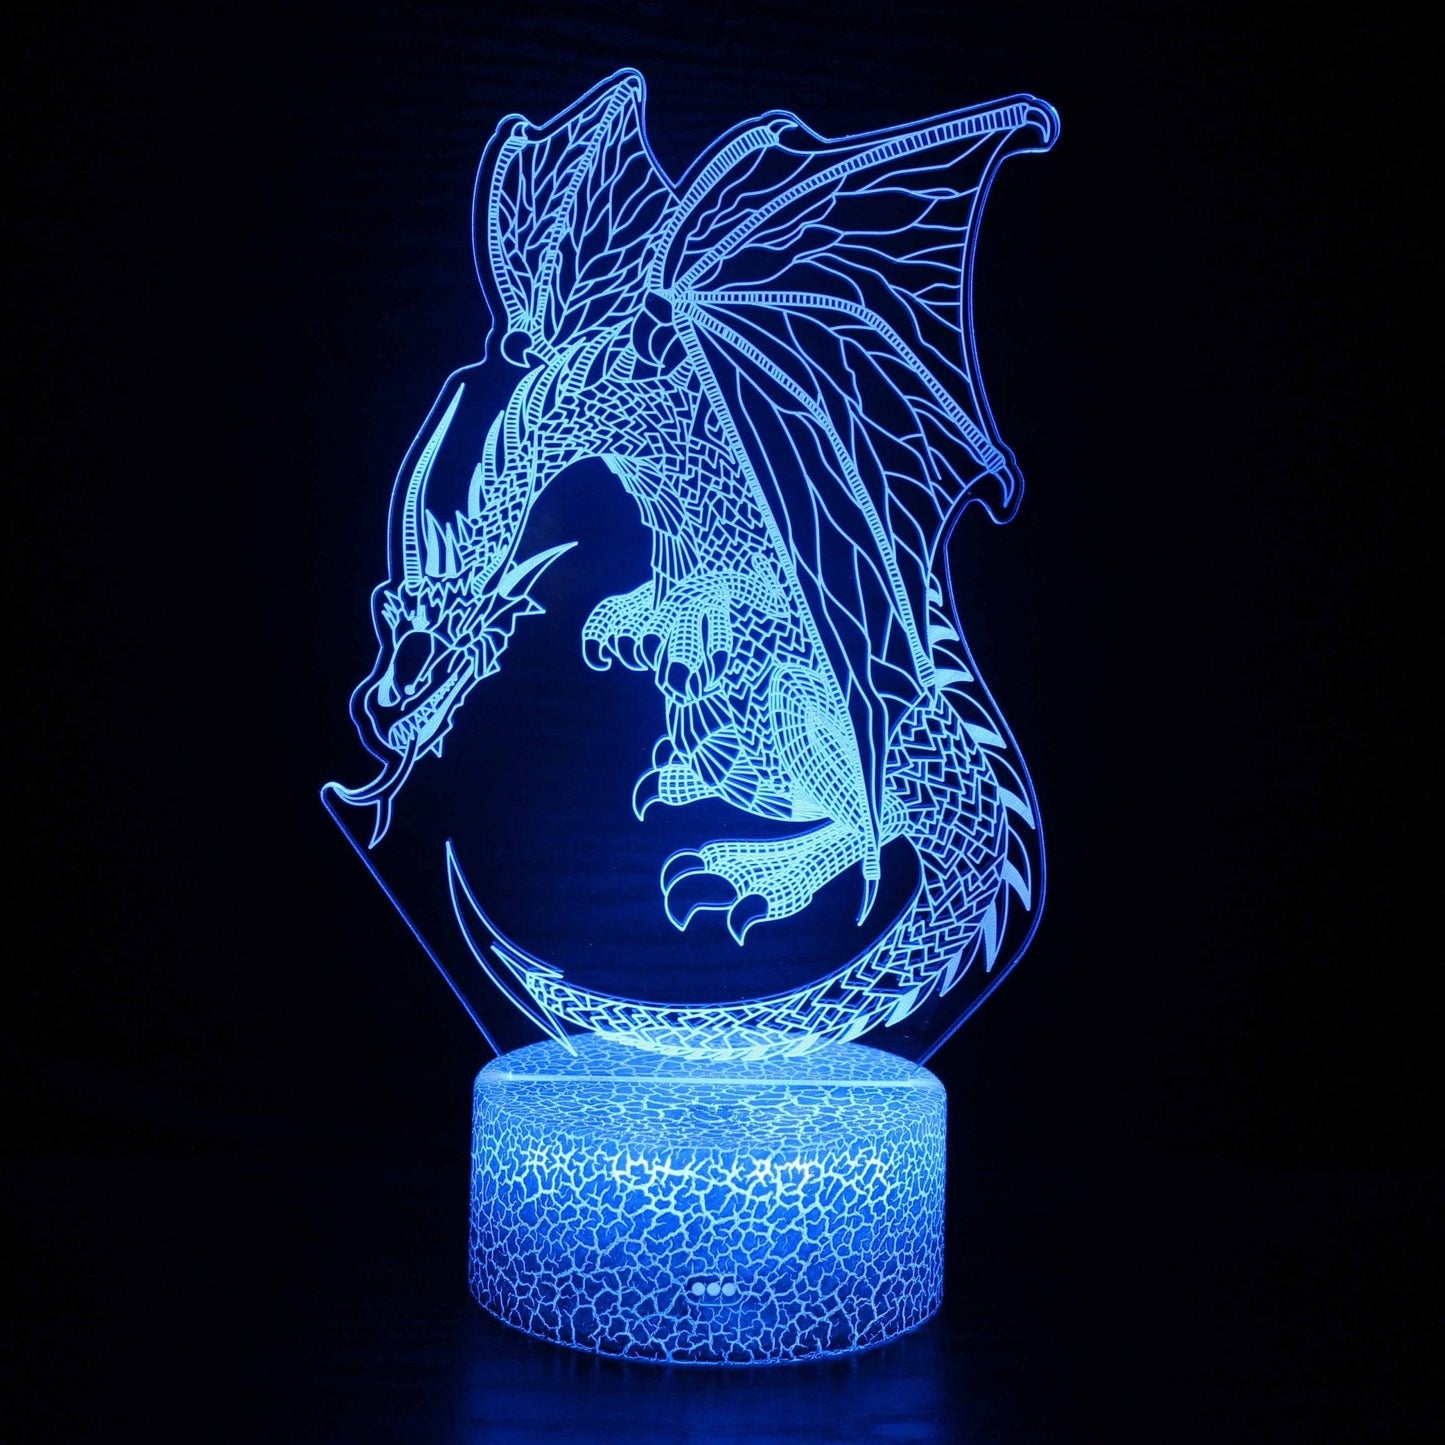 Dinosaur Series 3D Table Lamp LED Colorful Touch Remote Control Gift Nightlight - CLASSY CLOSET BOUTIQUEDinosaur Series 3D Table Lamp LED Colorful Touch Remote Control Gift Nightlighteperlo9044F33D24834A699EA7532A10FFD83EKX-20827 Colors No Remote